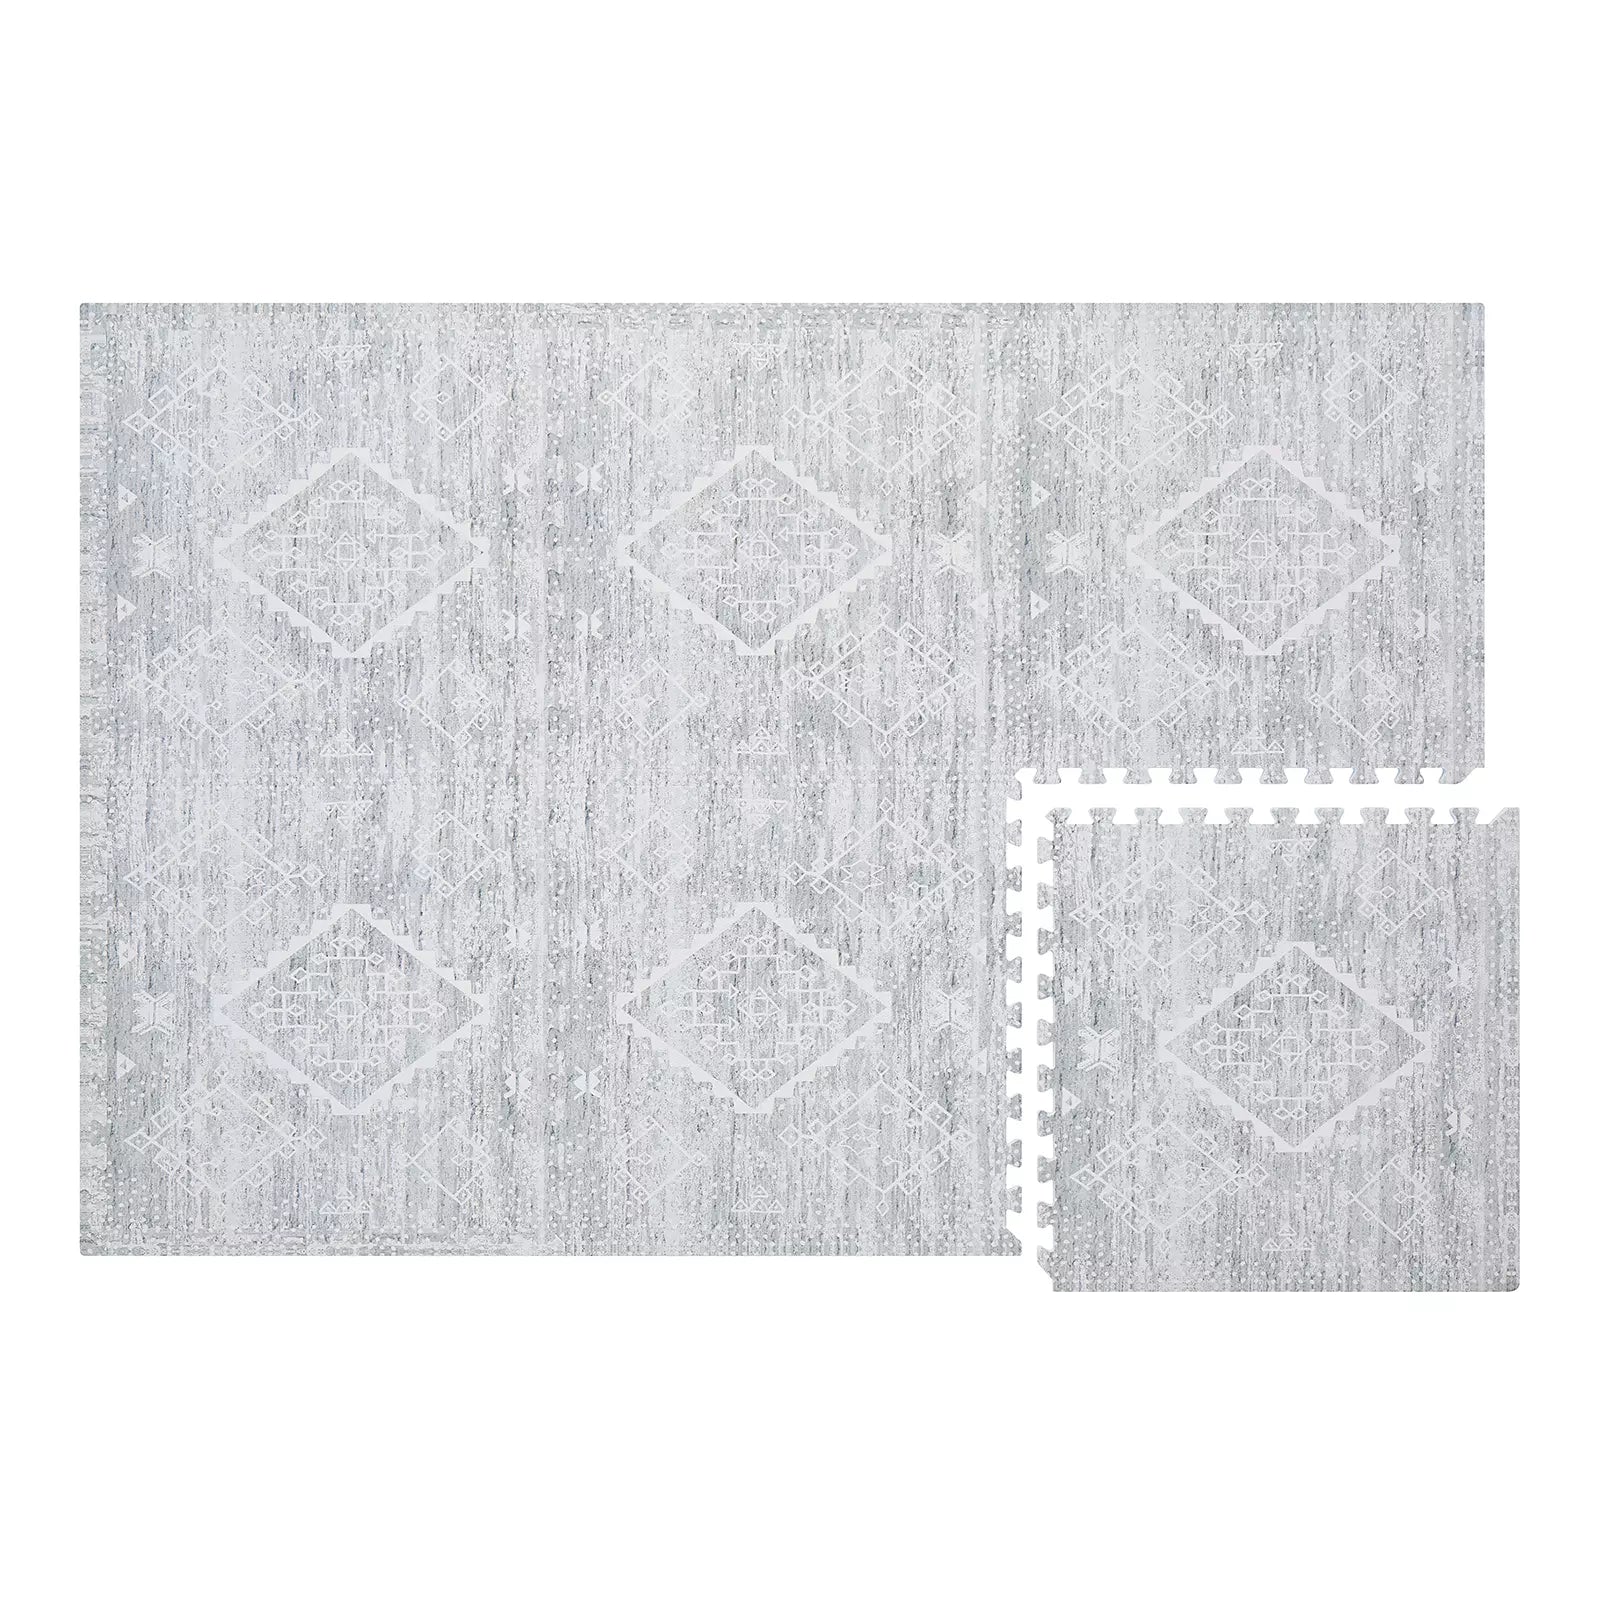 Gray and white minimal boho baby play mat shown in size 4x6 with 1 tile exposed